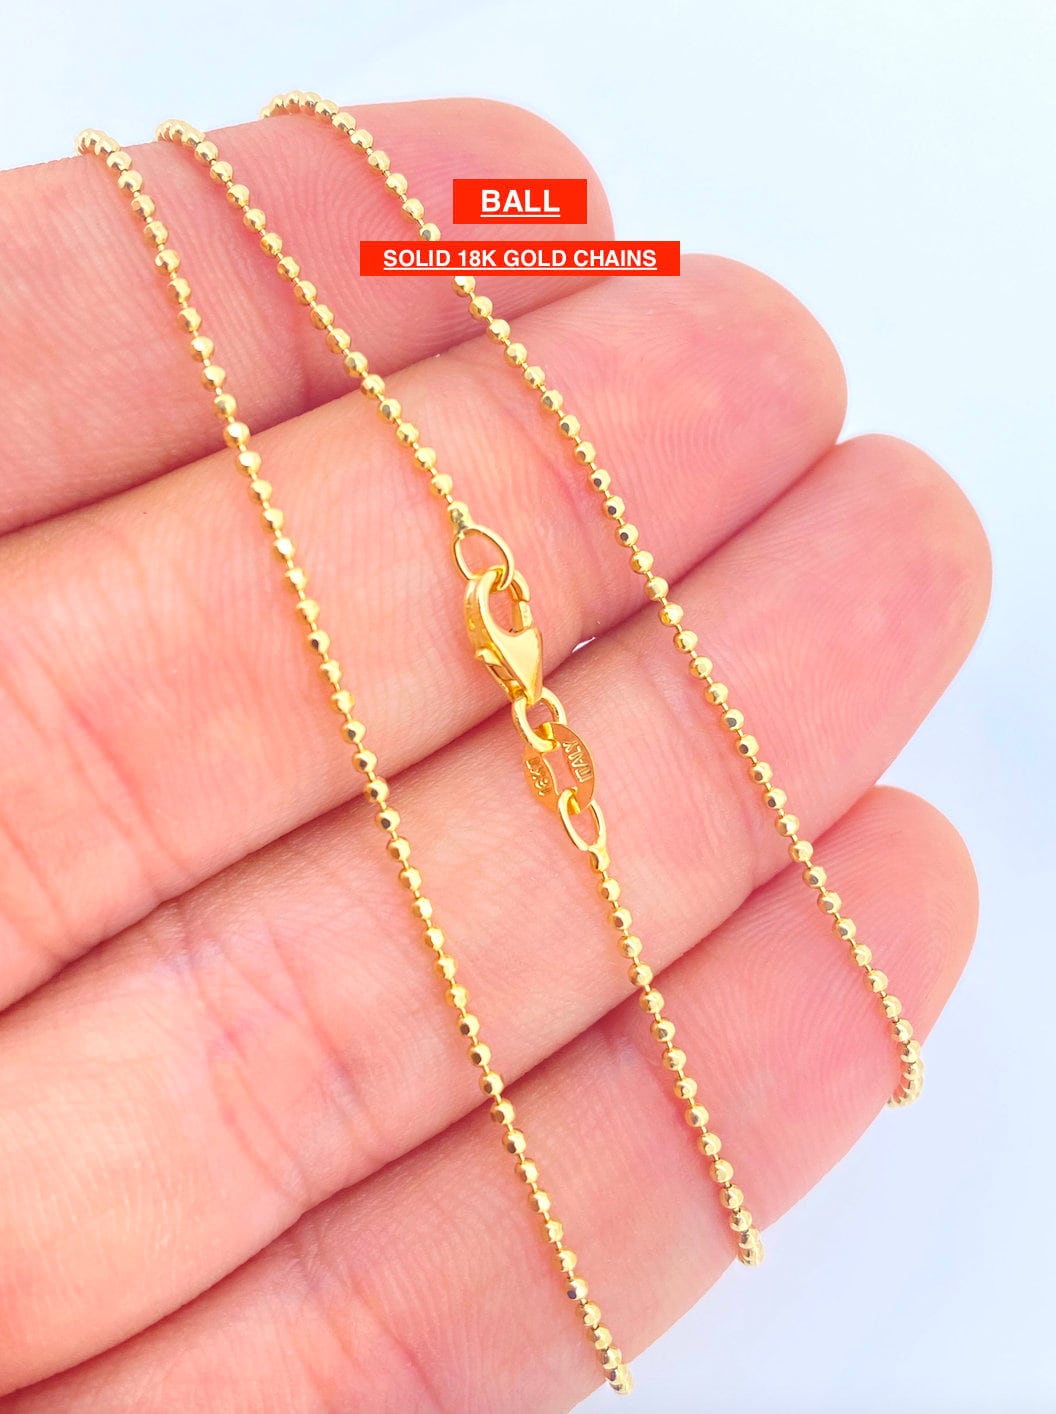 Ball Chain,metal chains for crafts keychains necklaces men,chain link  necklace for women Accessories Plated,diy jewelry necklace chain link